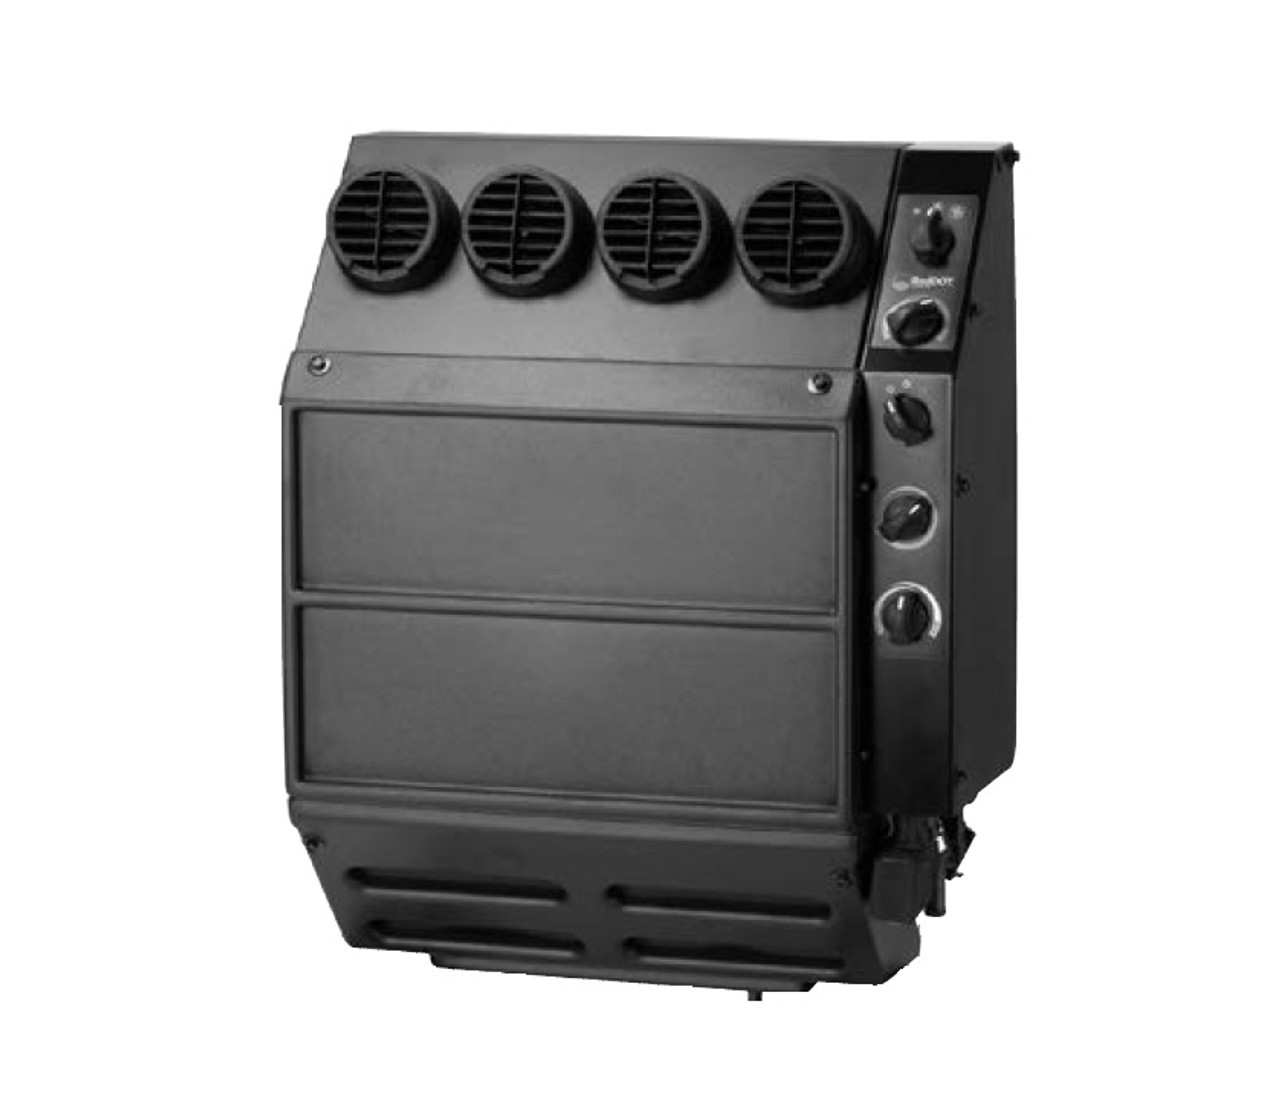 Red Dot Heater/Air Conditioner Unit R-5045-5-24P